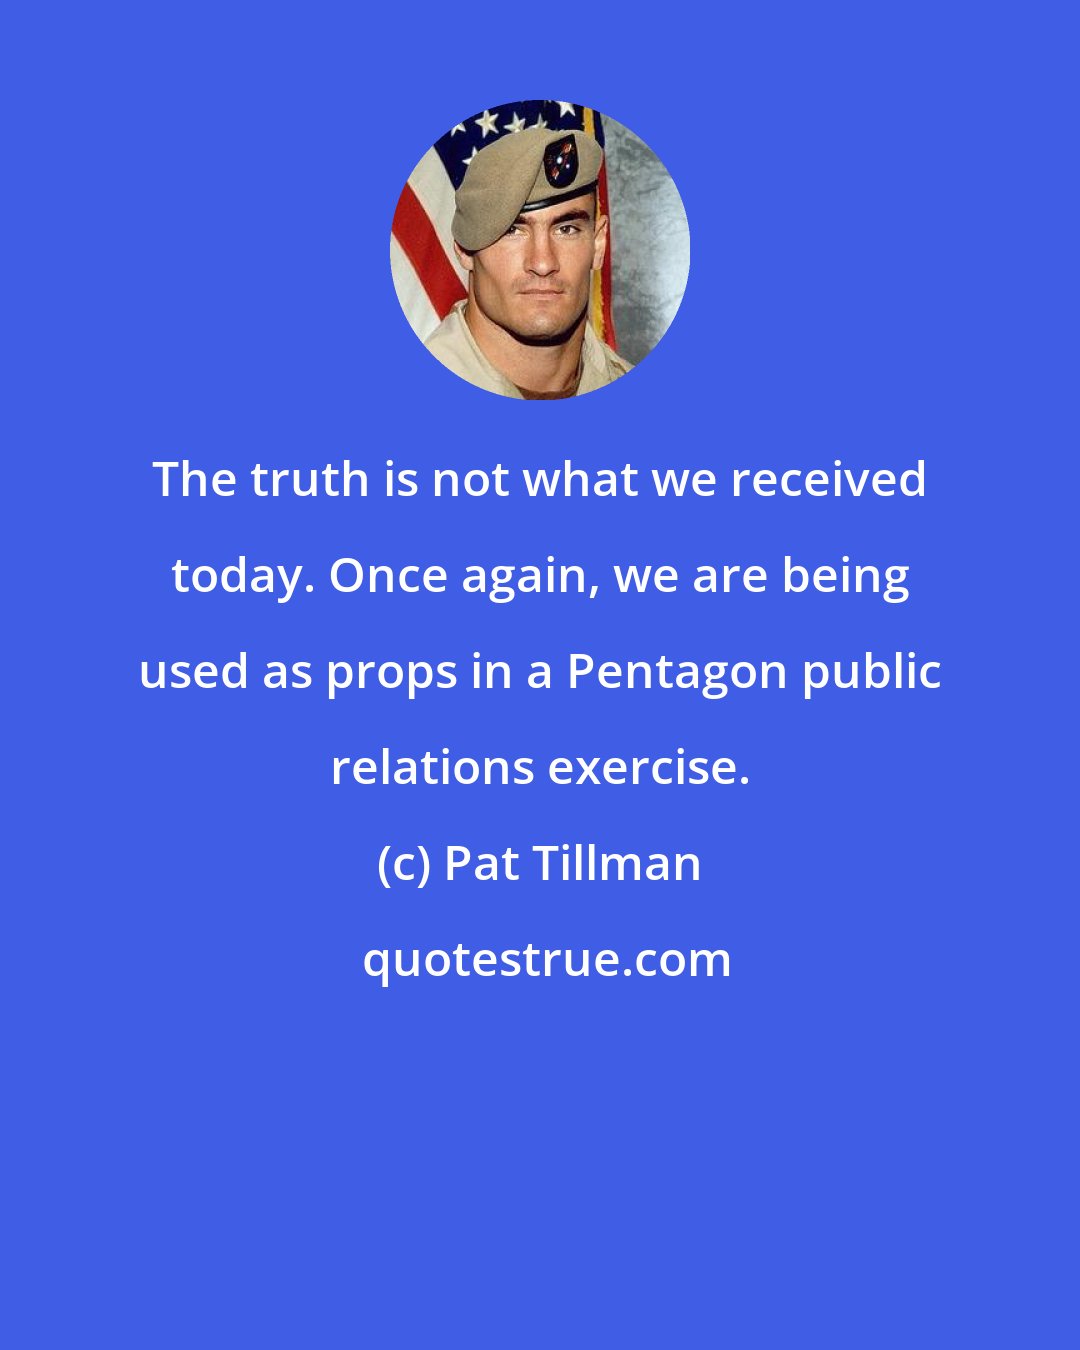 Pat Tillman: The truth is not what we received today. Once again, we are being used as props in a Pentagon public relations exercise.